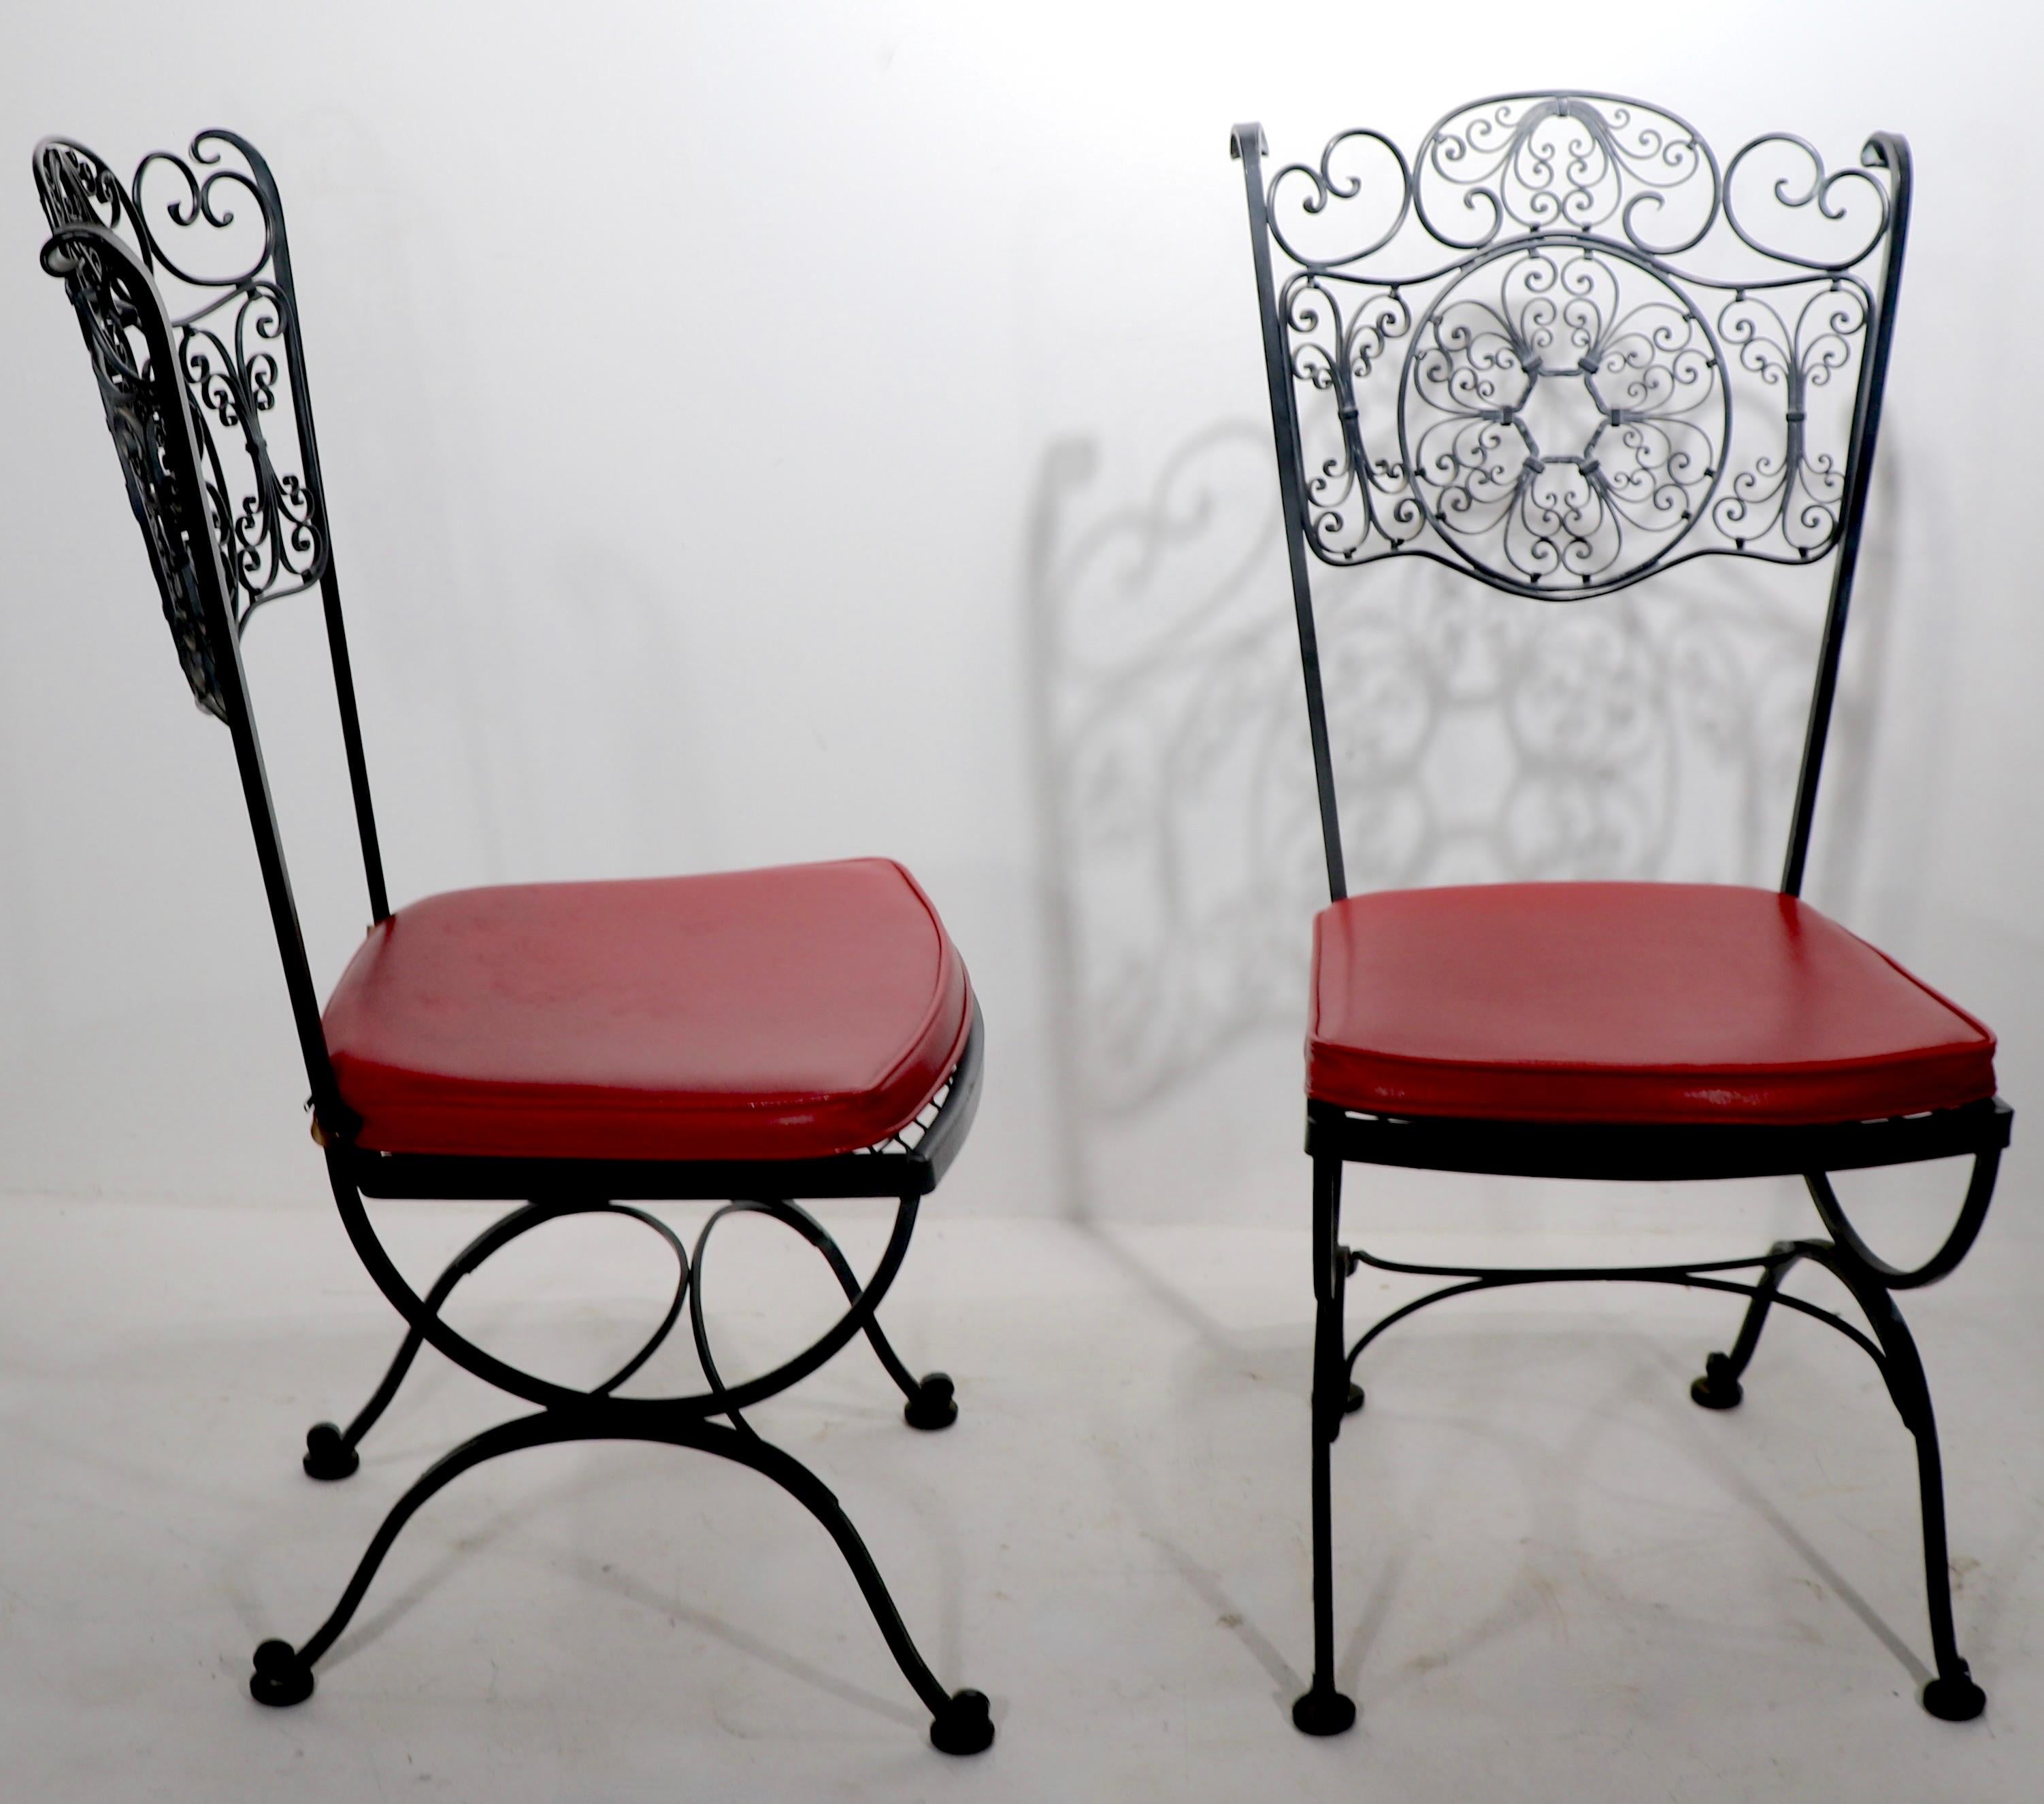 Pair ornate wrought iron dining chairs, with original vinyl seats. Both are in very fine, ready to use condition, retaining Lee Woodard labels. Offered and priced as a pair.